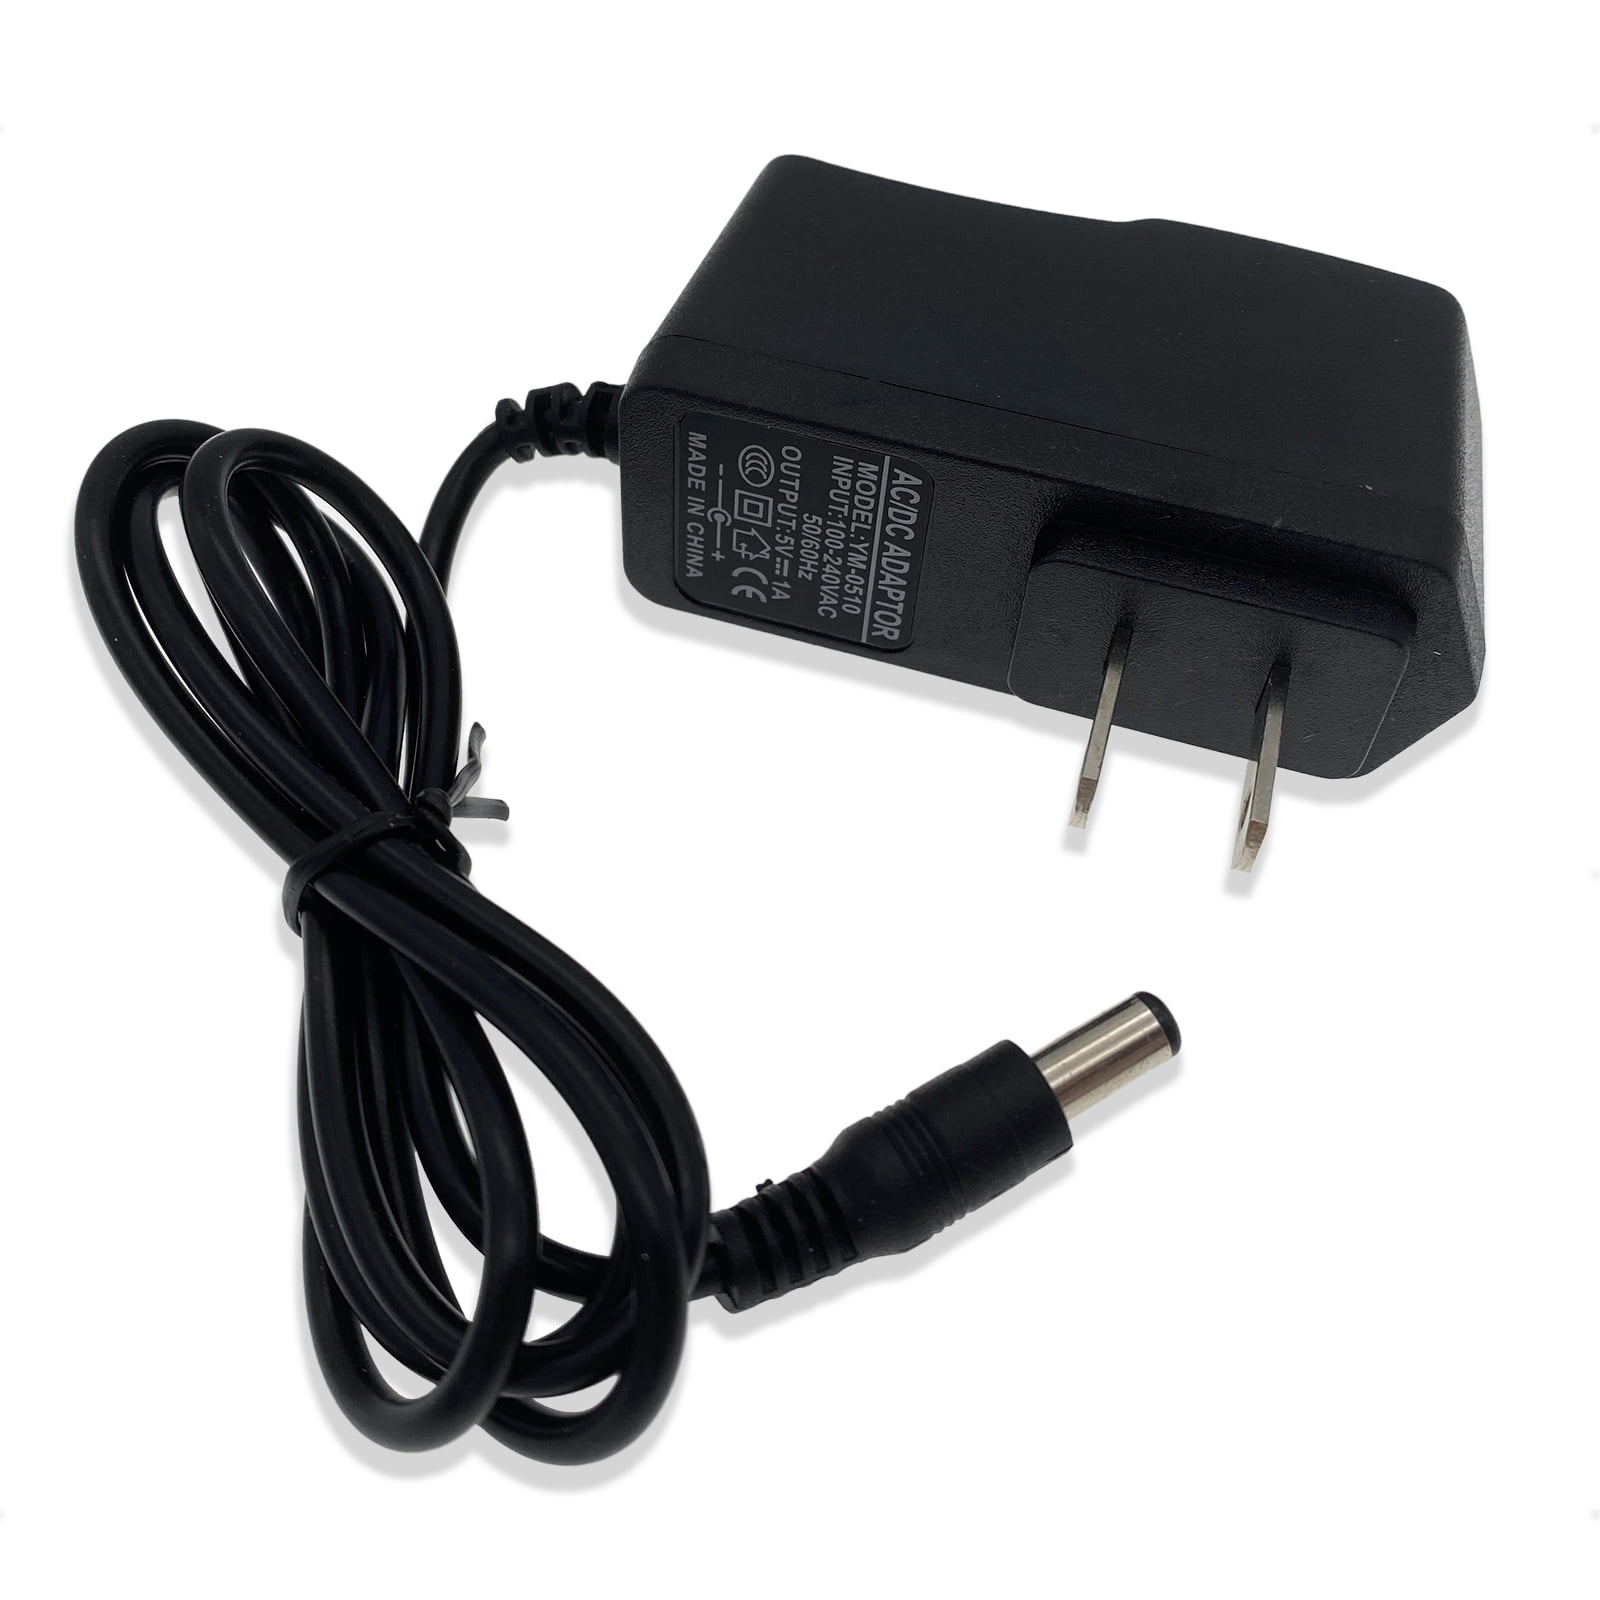 AC100-240V to DC 5V 1A 5.5mm * 2.1mm Wall Charger Adapter Converter Power  Supply 